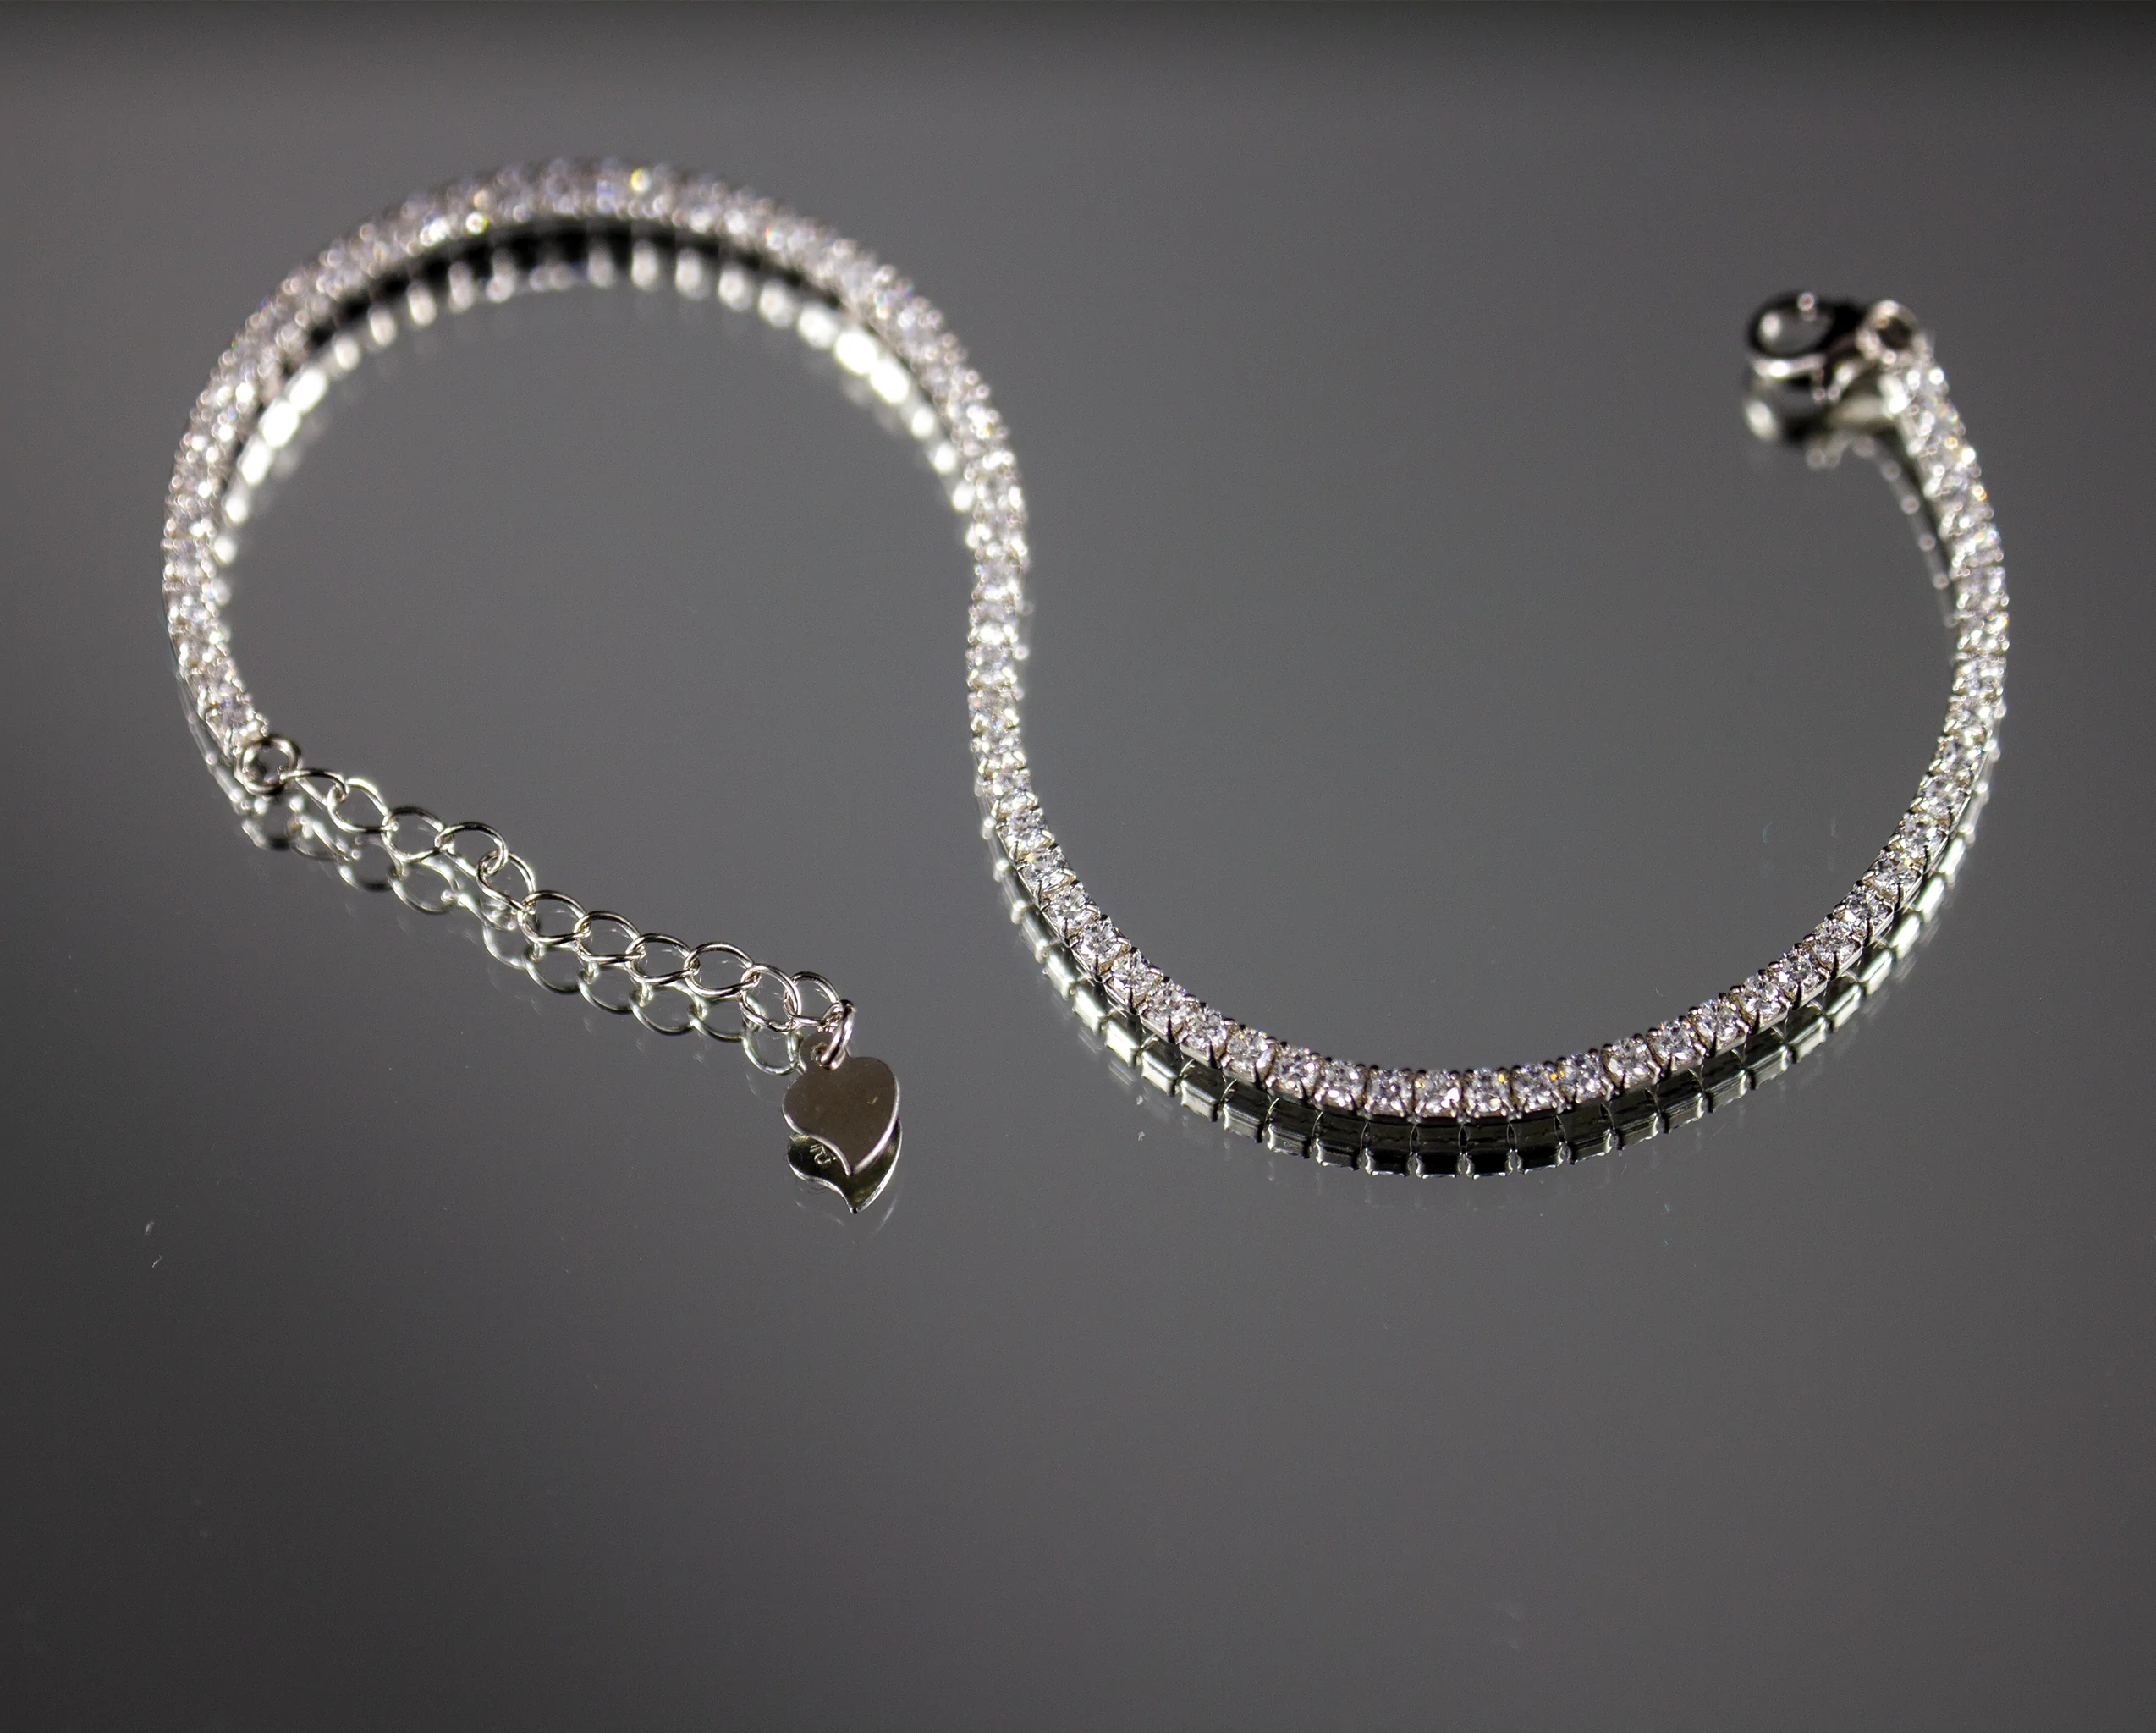 stacy tennis bracelet from Lucy Nash